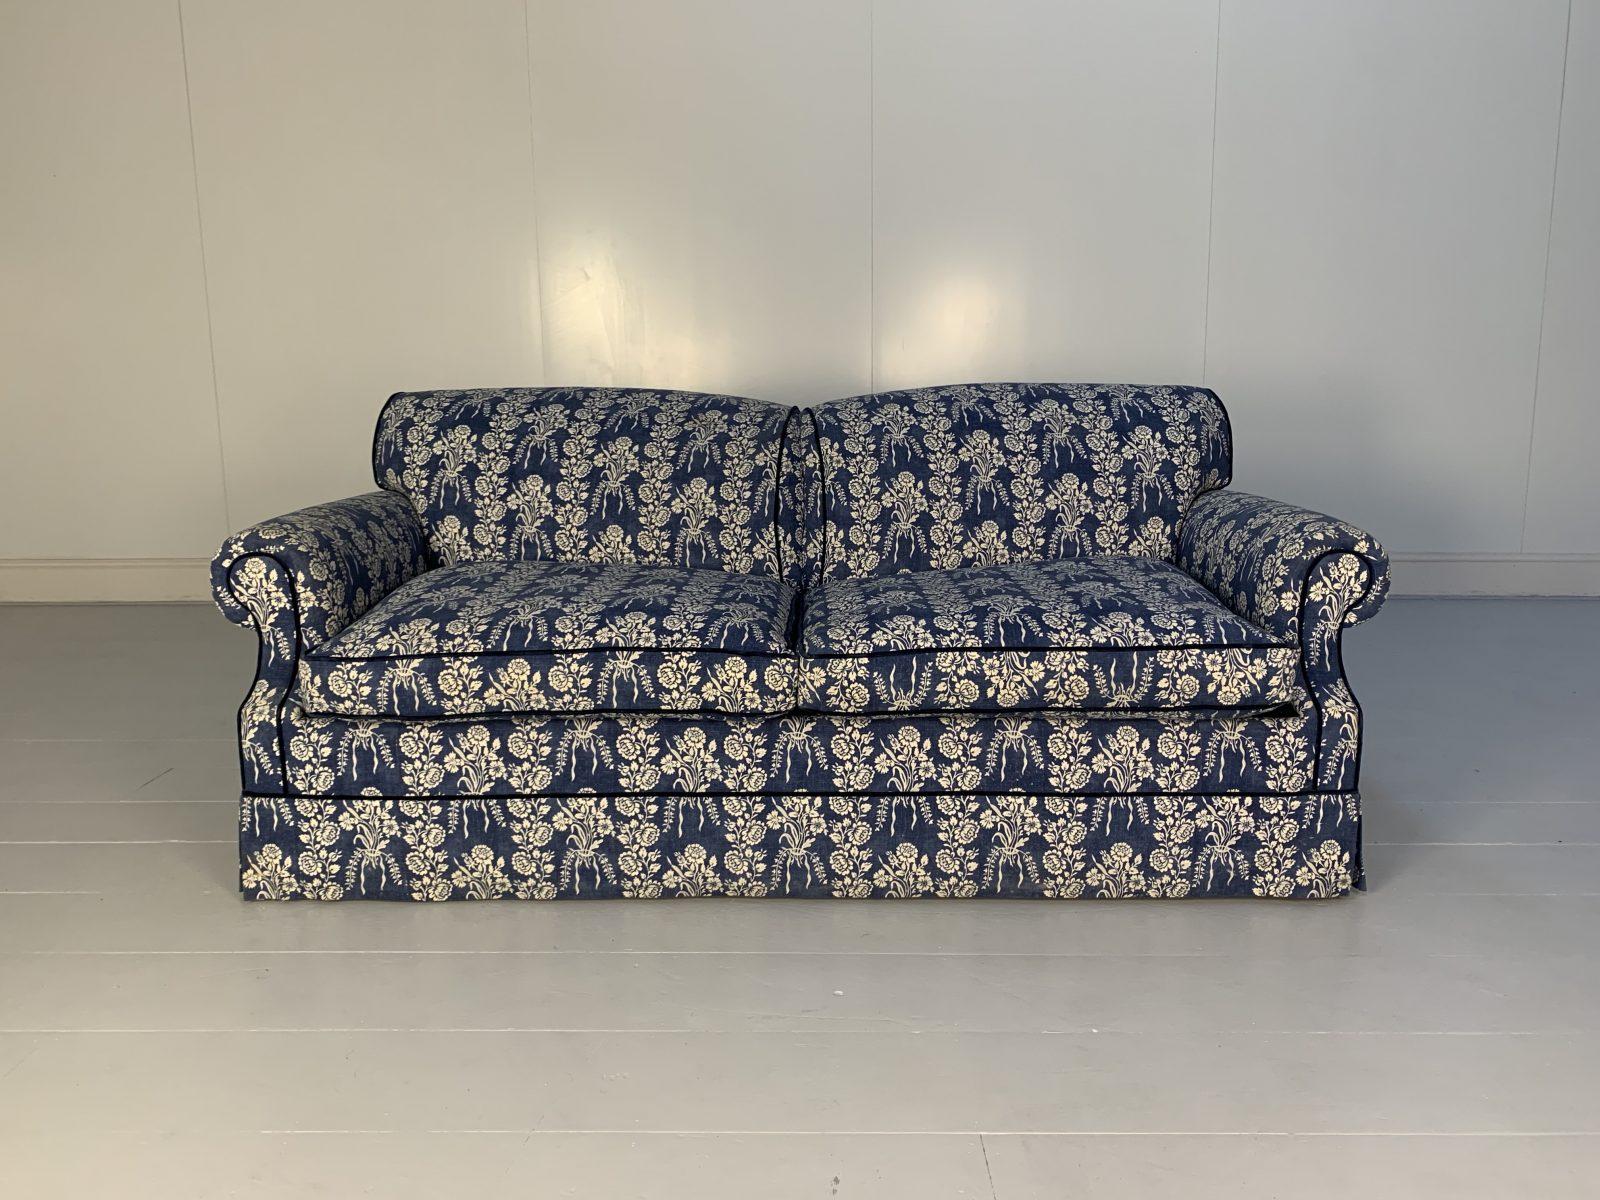 This is a superb William Yeoward “Percy” 2.5-Seat Sofa Bed, dressed in an unashamedly-classical, floral-motif woven-linen fabric in French-Blue and White.

In a world of temporary pleasures, William Yeoward create beautiful furniture built to last